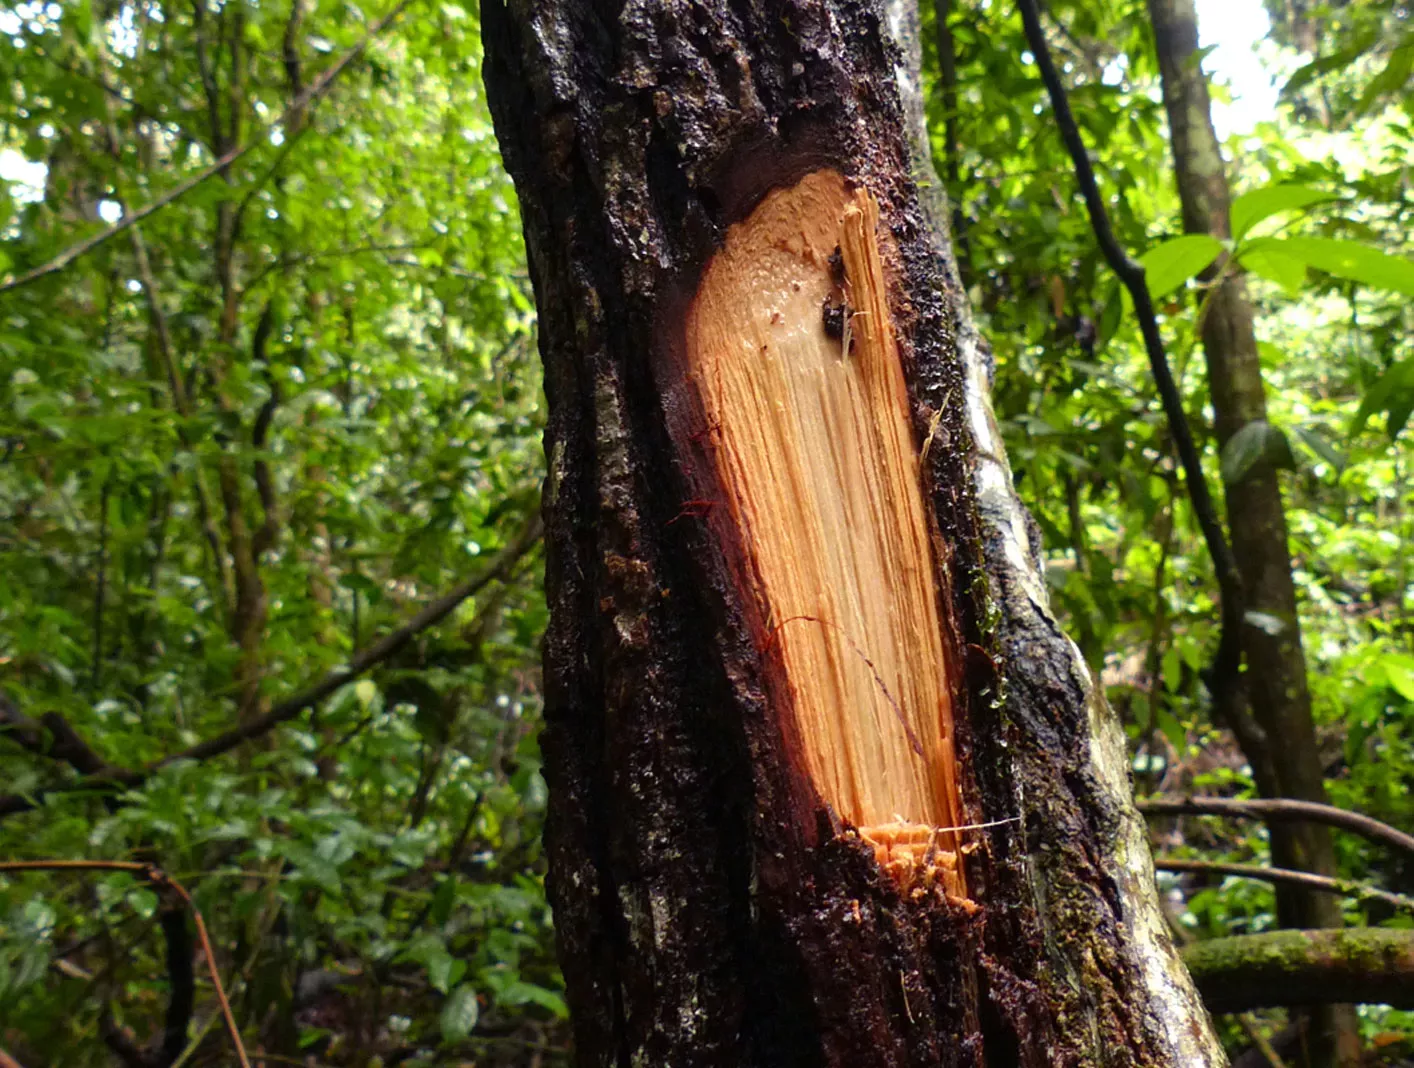 Trunk of Uncaria guianensis. Some of the trunk has been carved away.